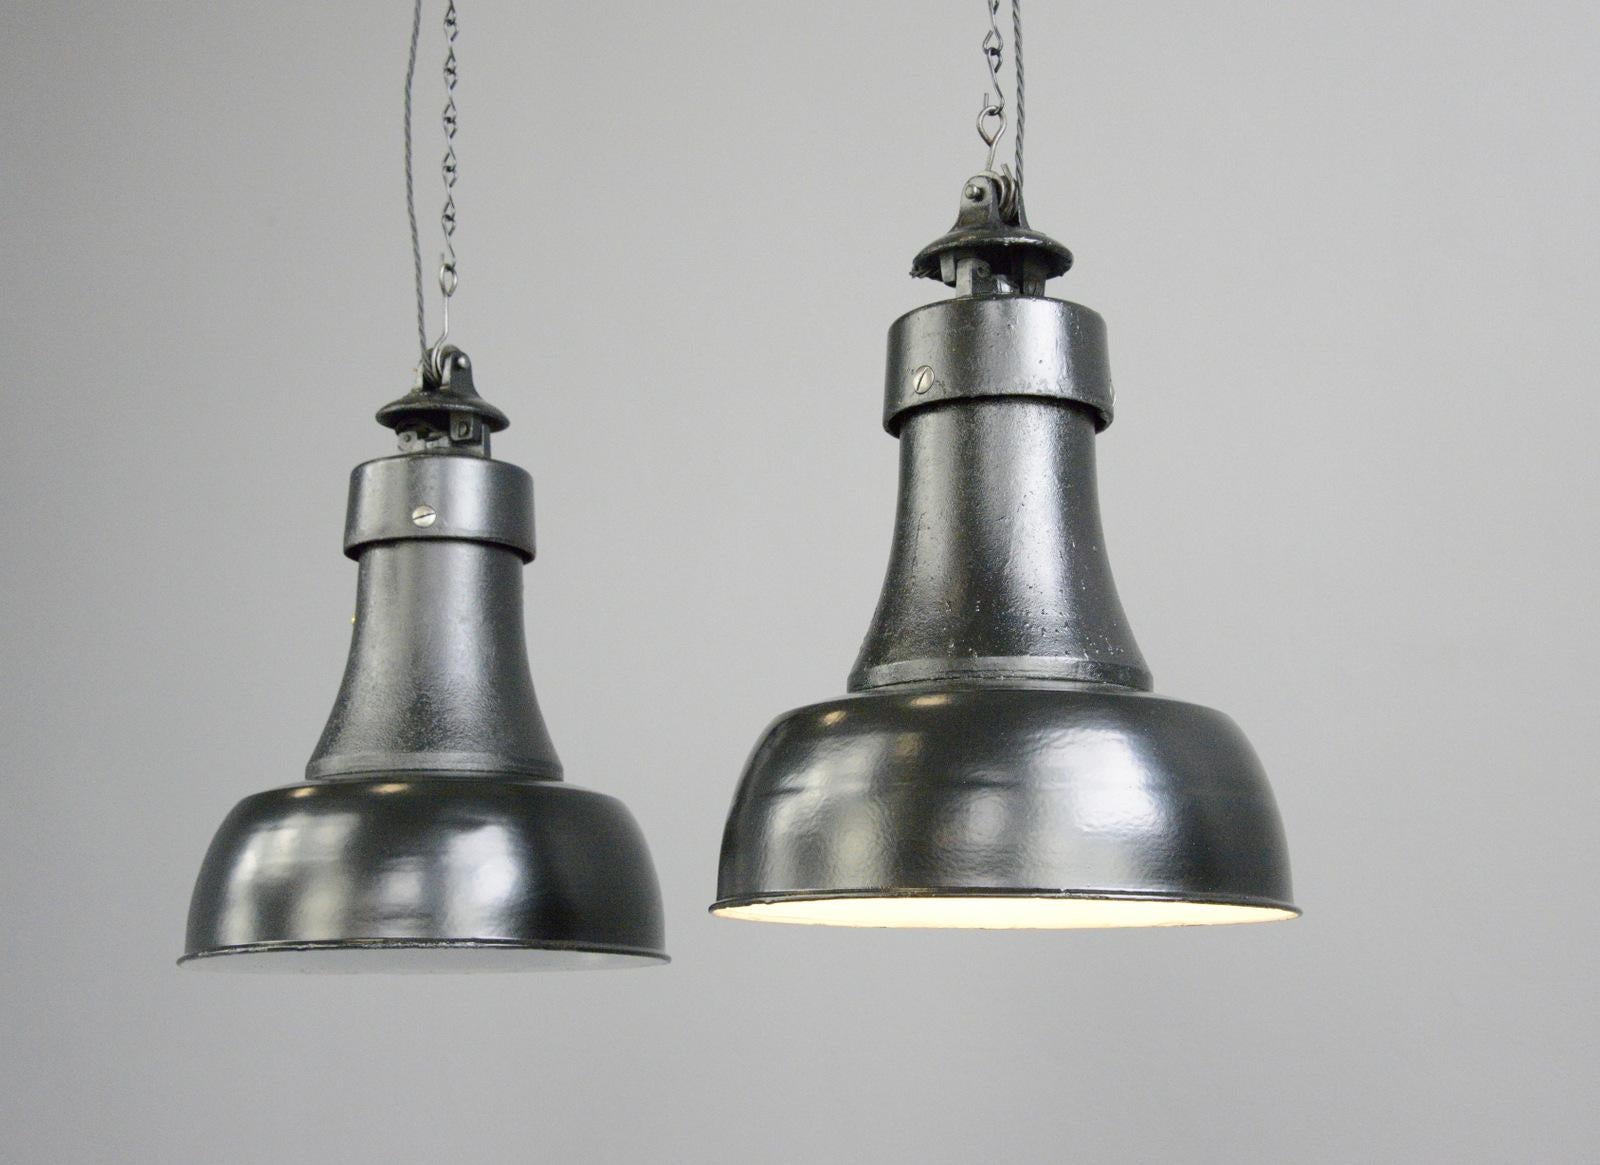 Bauhaus pendant light by Schaco, Circa 1920s

- Vitreous black enamel shades
- Cast iron necks
- Takes E27 fitting bulbs
- Cast iron and porcelain top
- Comes with 100cm of cable and chain
- Comes with ceiling hook
- Salvaged from a large